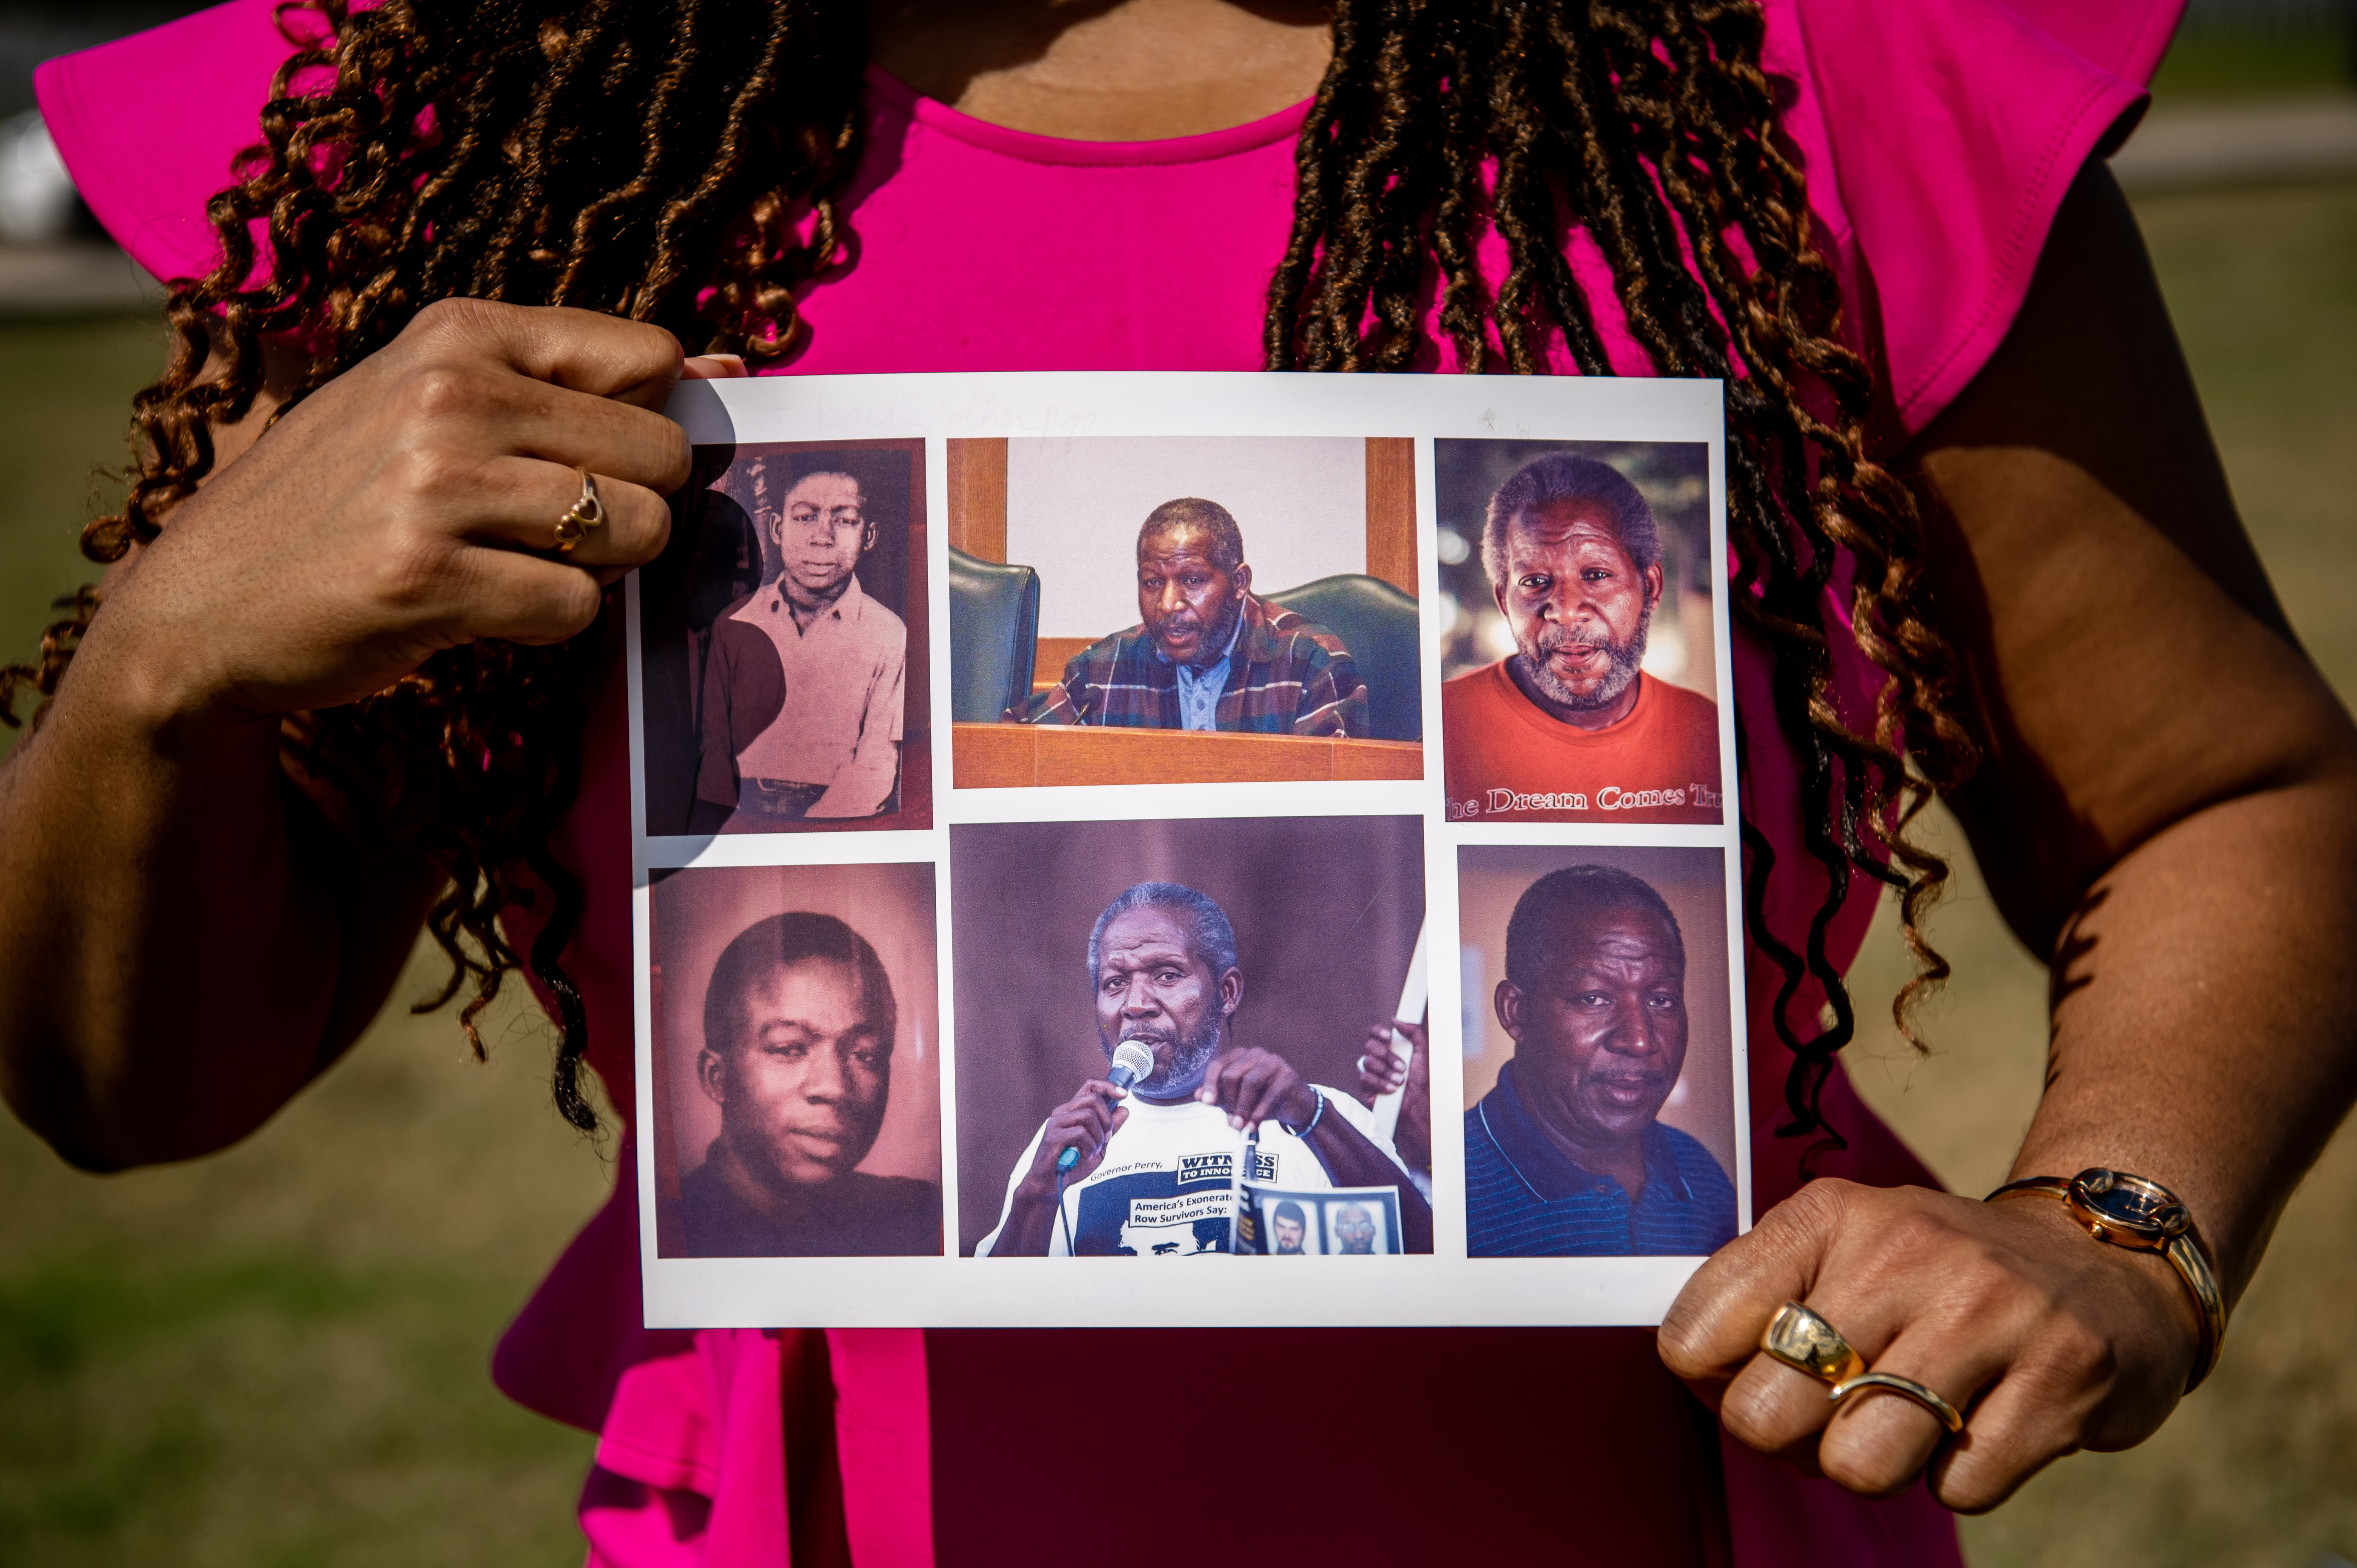 The torso of a Black woman in a pink top, holding a collection of Clarence Brandley images in a rectangular grid. She has rings on her fingers and her hair cascades around her shoulders.